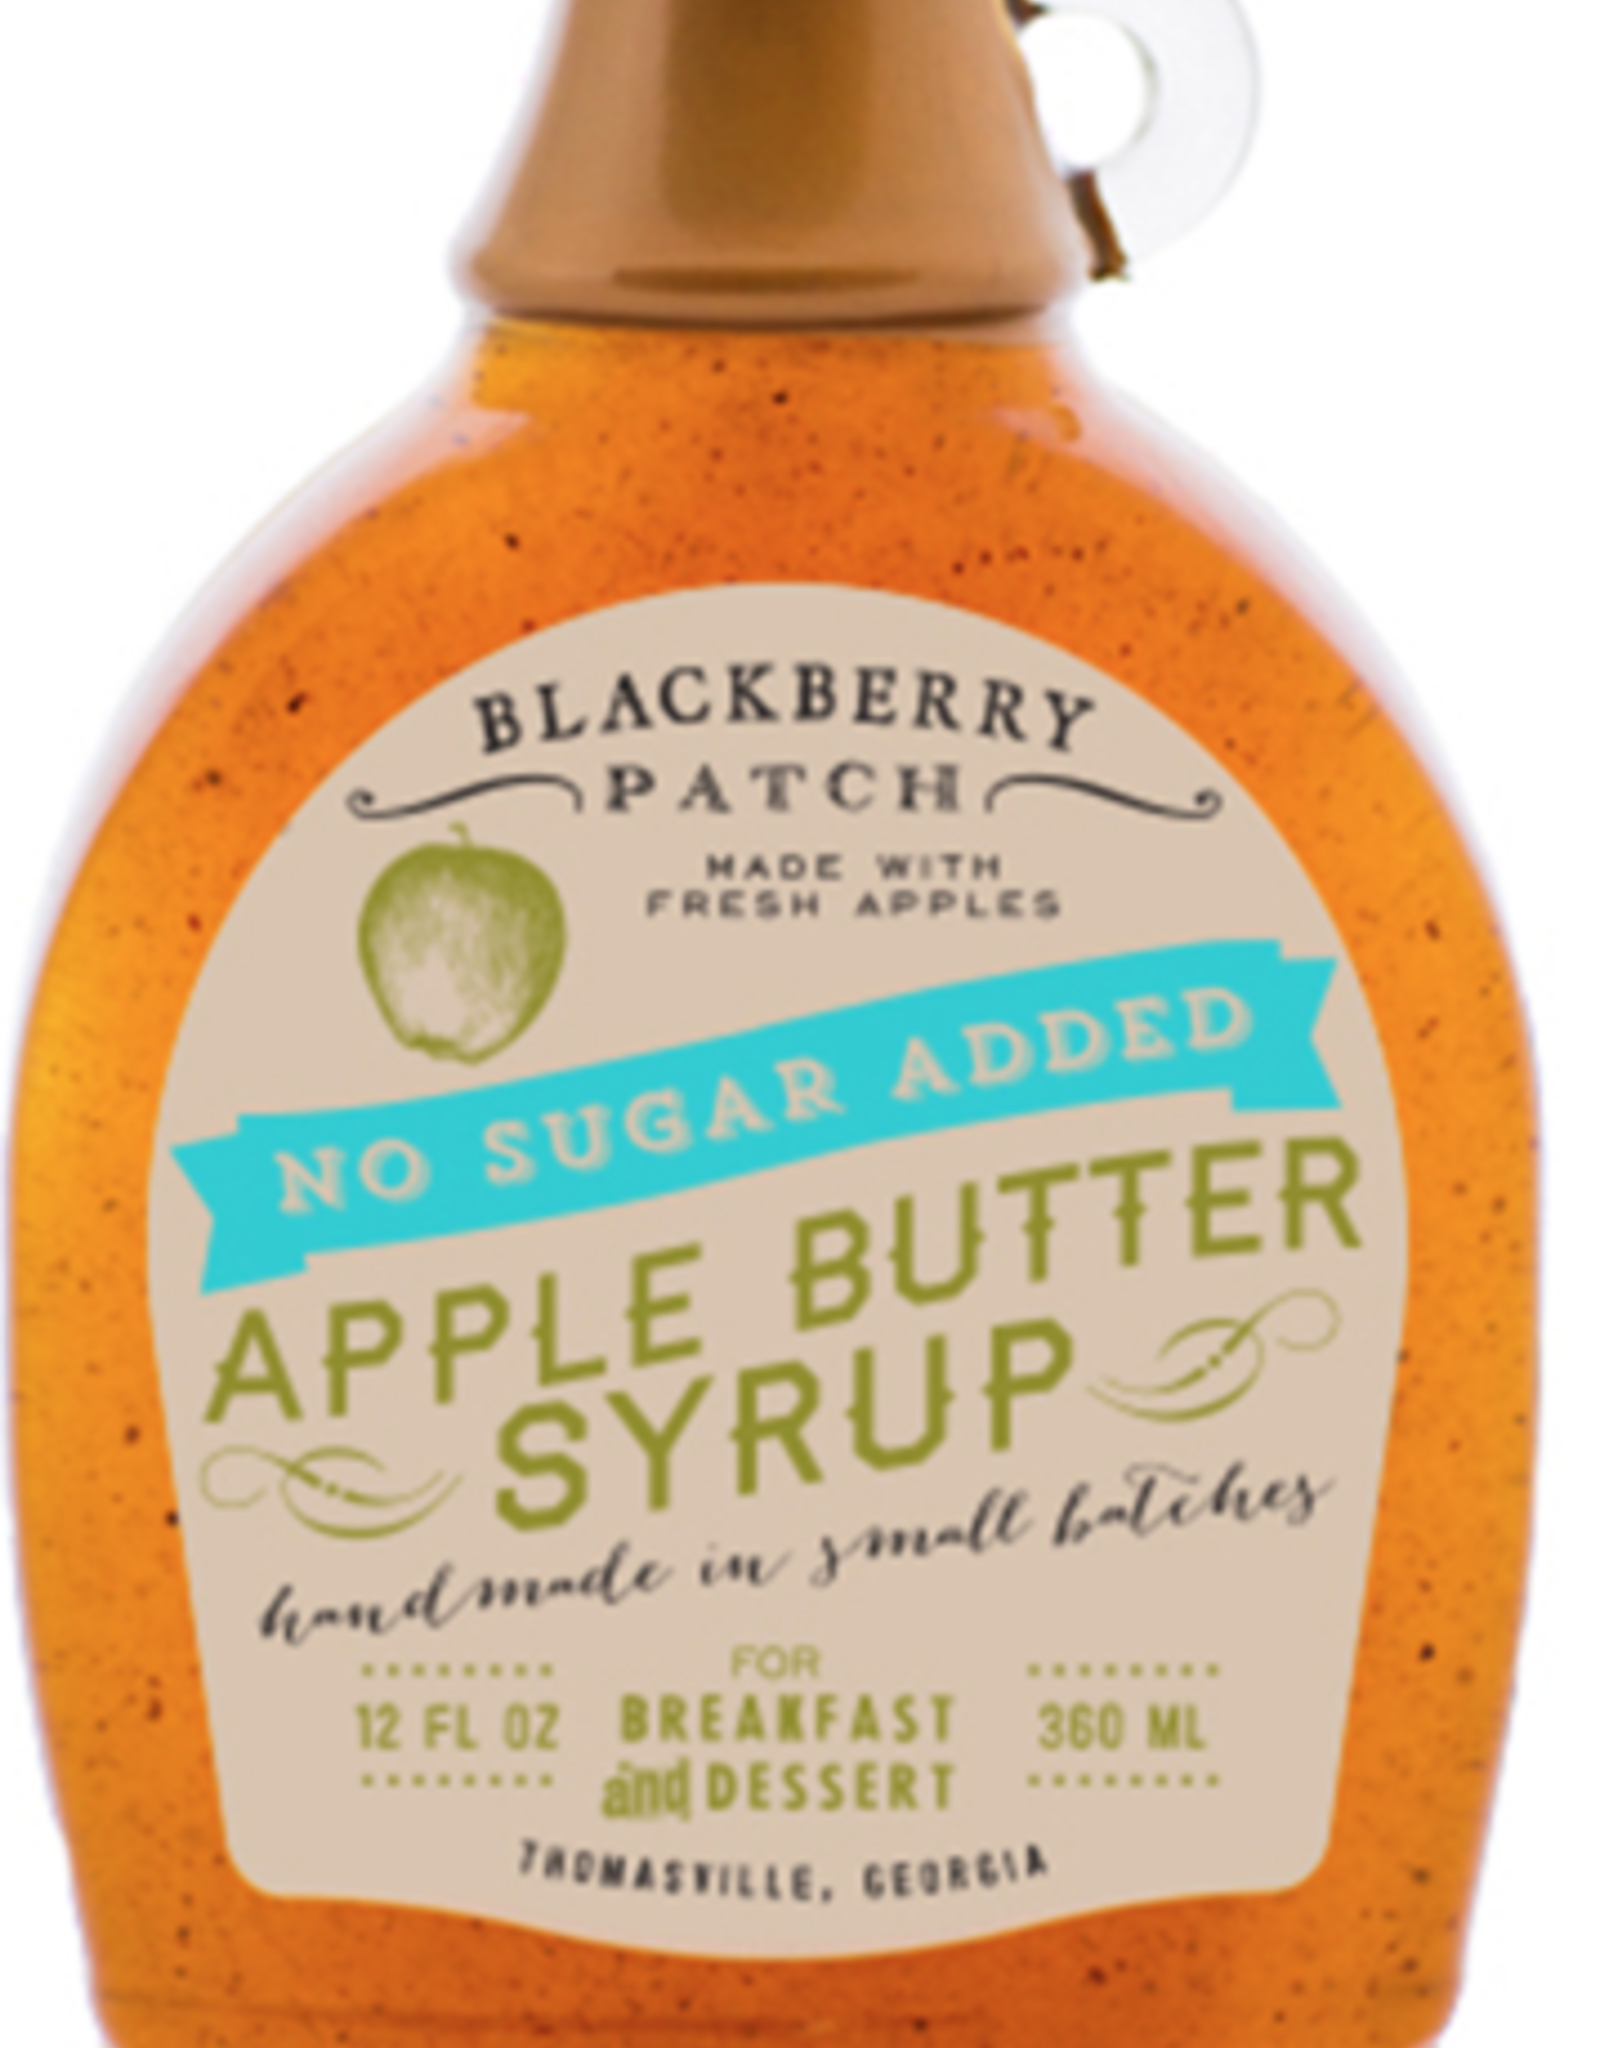 Blackberry Patch Syrup - Apple Butter (No Sugar Added)